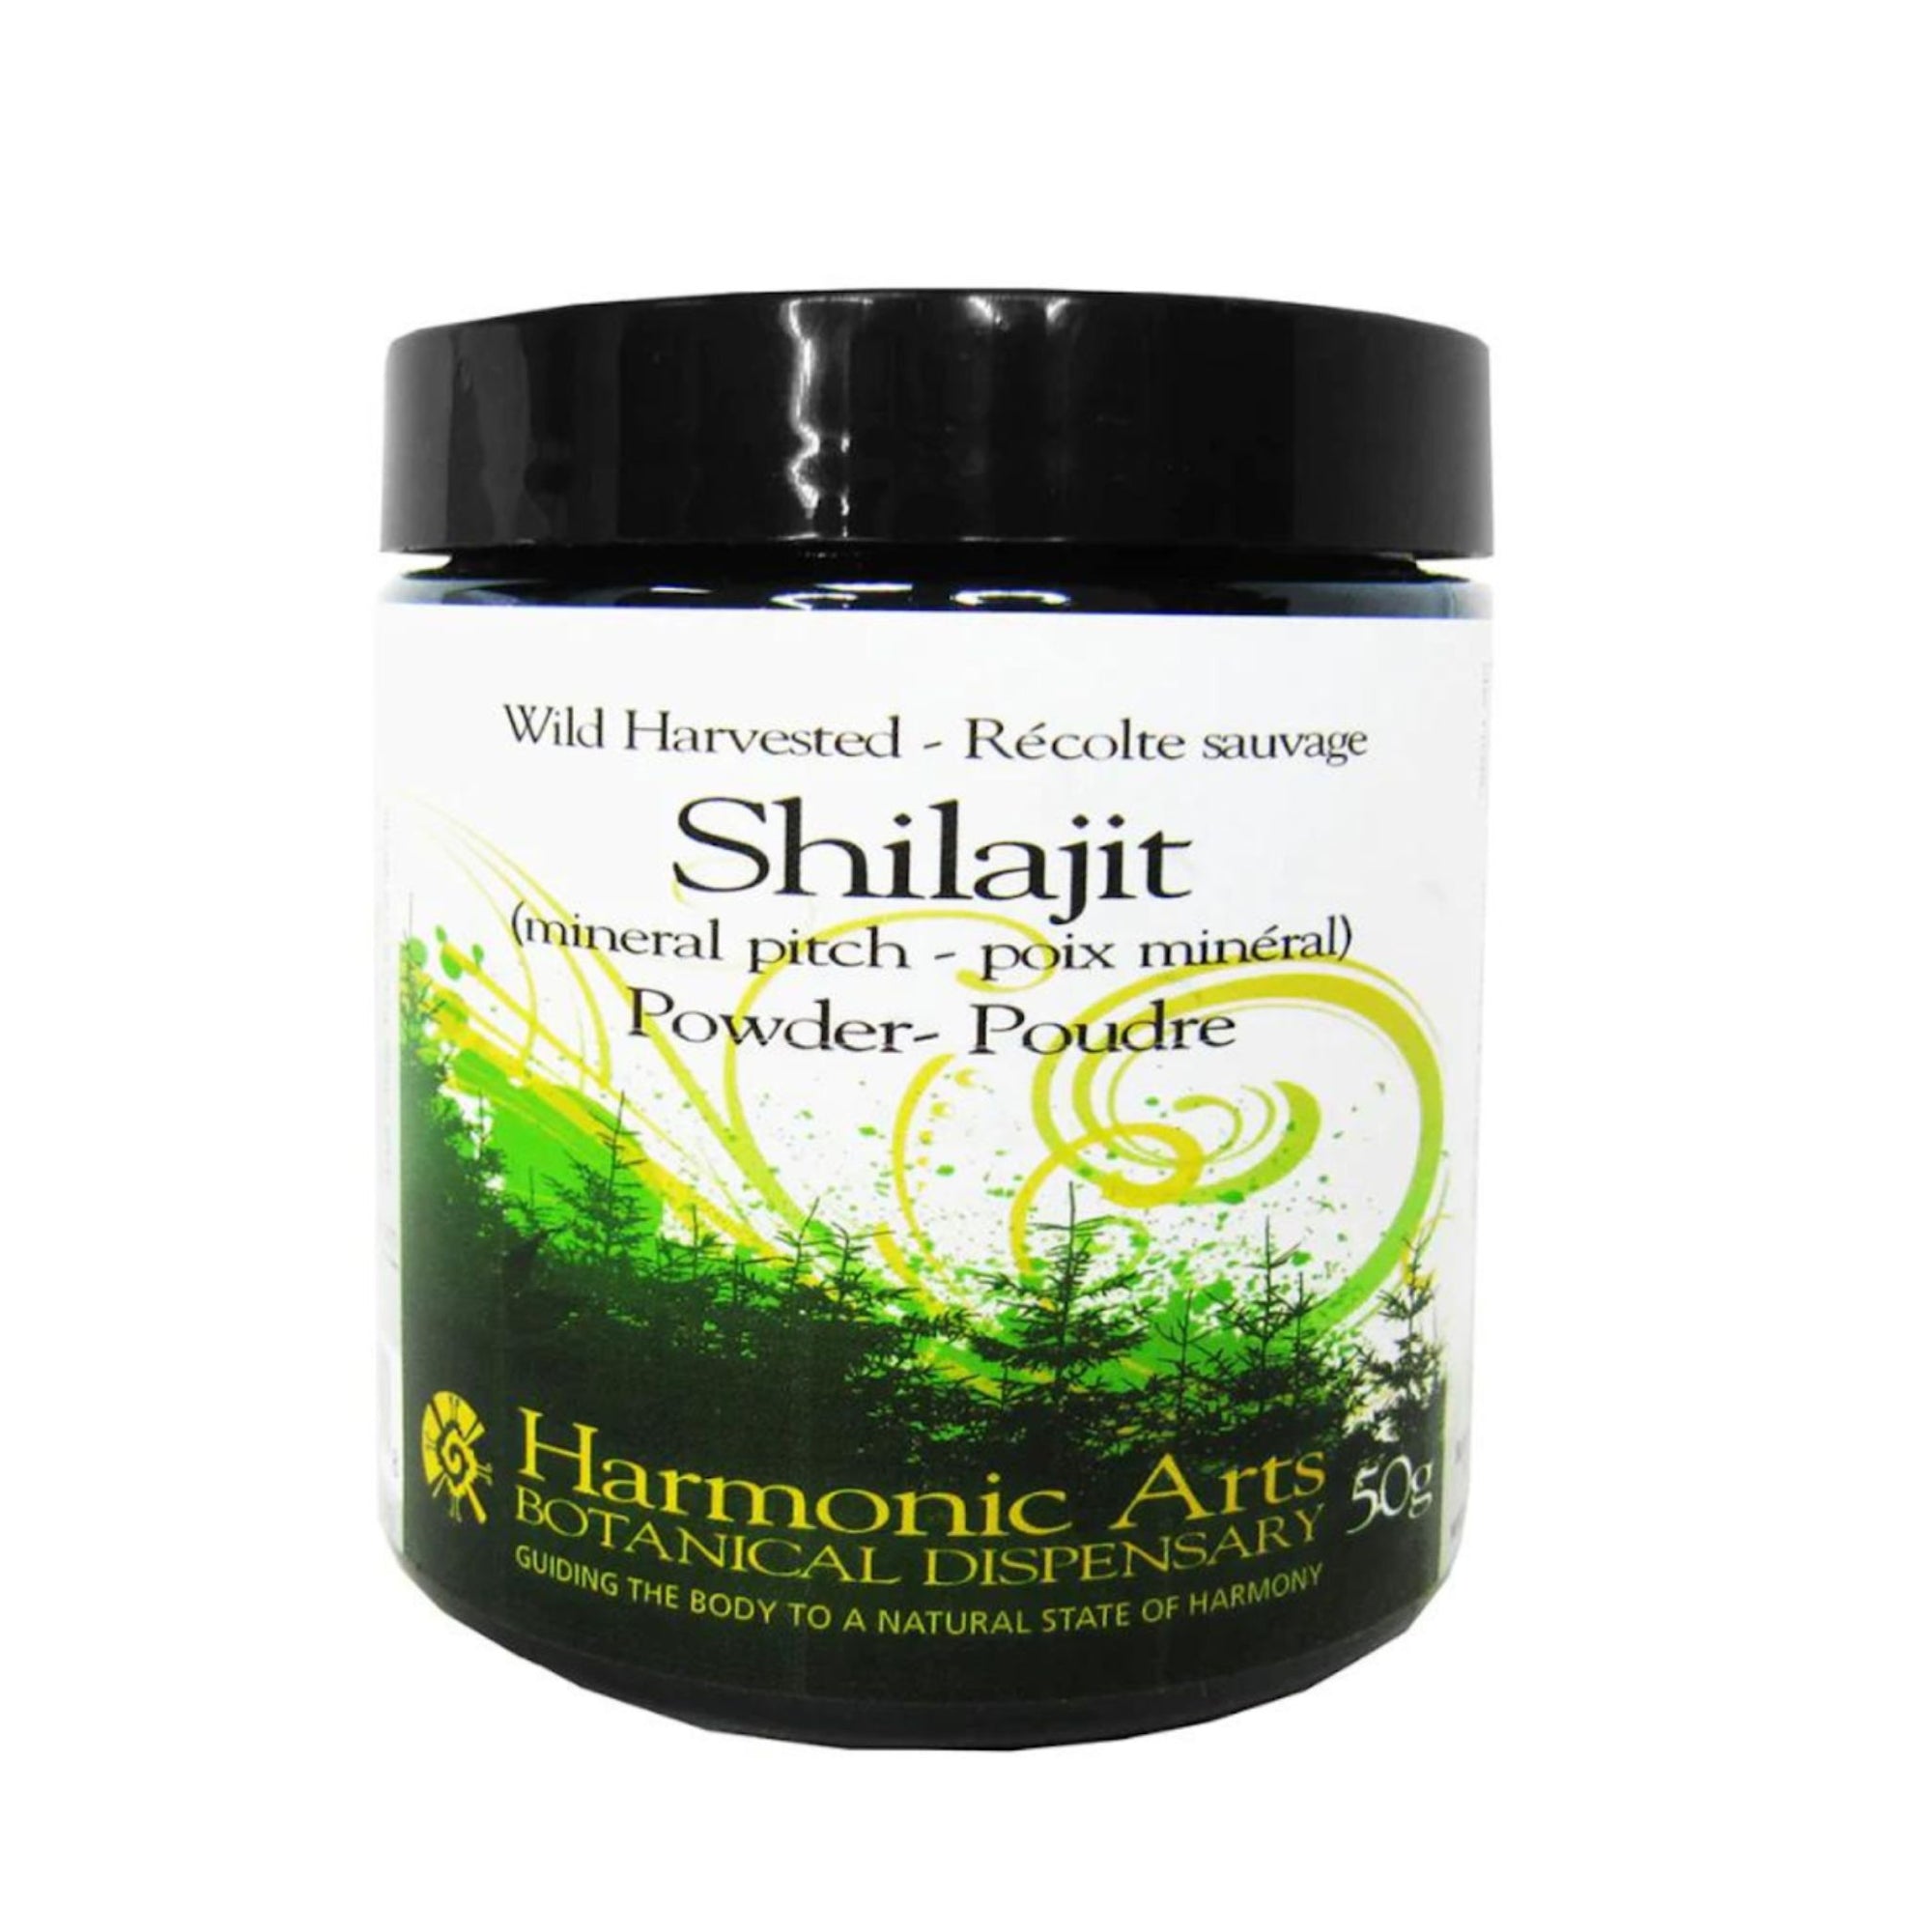 Harmonic Arts Shilajit Powder - 50g: A natural and potent herbal supplement known for its health benefits: high in fumic and fulvic acids providing essential minerals. 